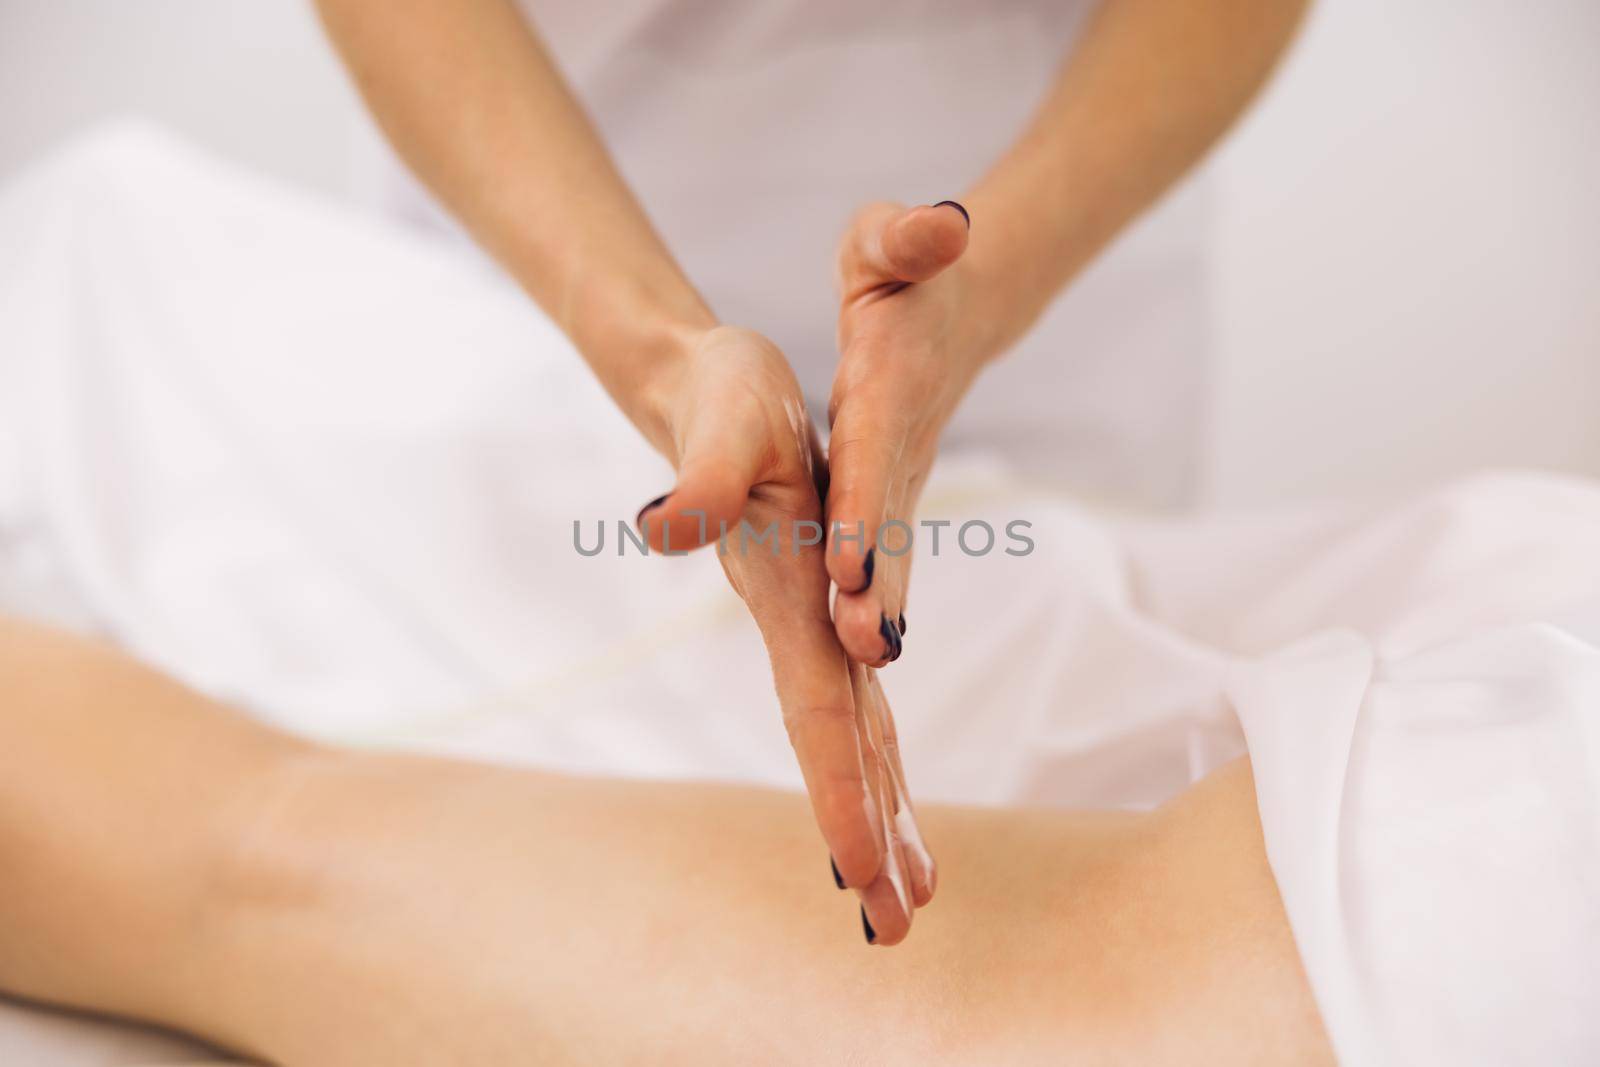 Woman receiving professional body, leg and foot massage and lymphatic drainage in health massage salon. Massage creme treatment. Anti-cellulite massage of hips by uflypro